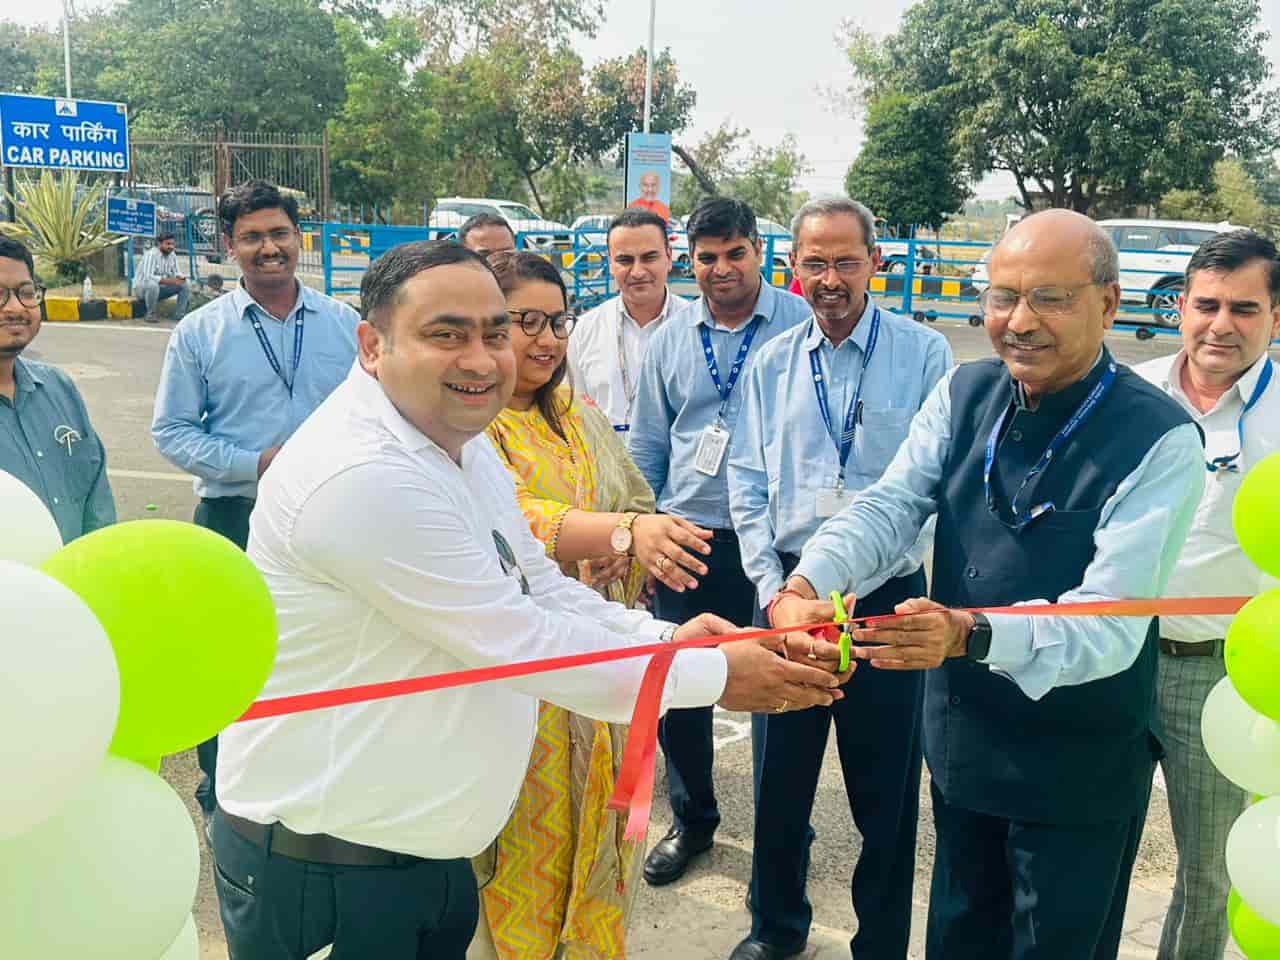 May 24 2023 Tata Power 1 Tata Power one of India Town Post's leading EV charging solutions providers, collaborates with Ranchi Airport Authority to install two public 30 Kw EV chargers at Birsa Munda Airport, Ranchi.